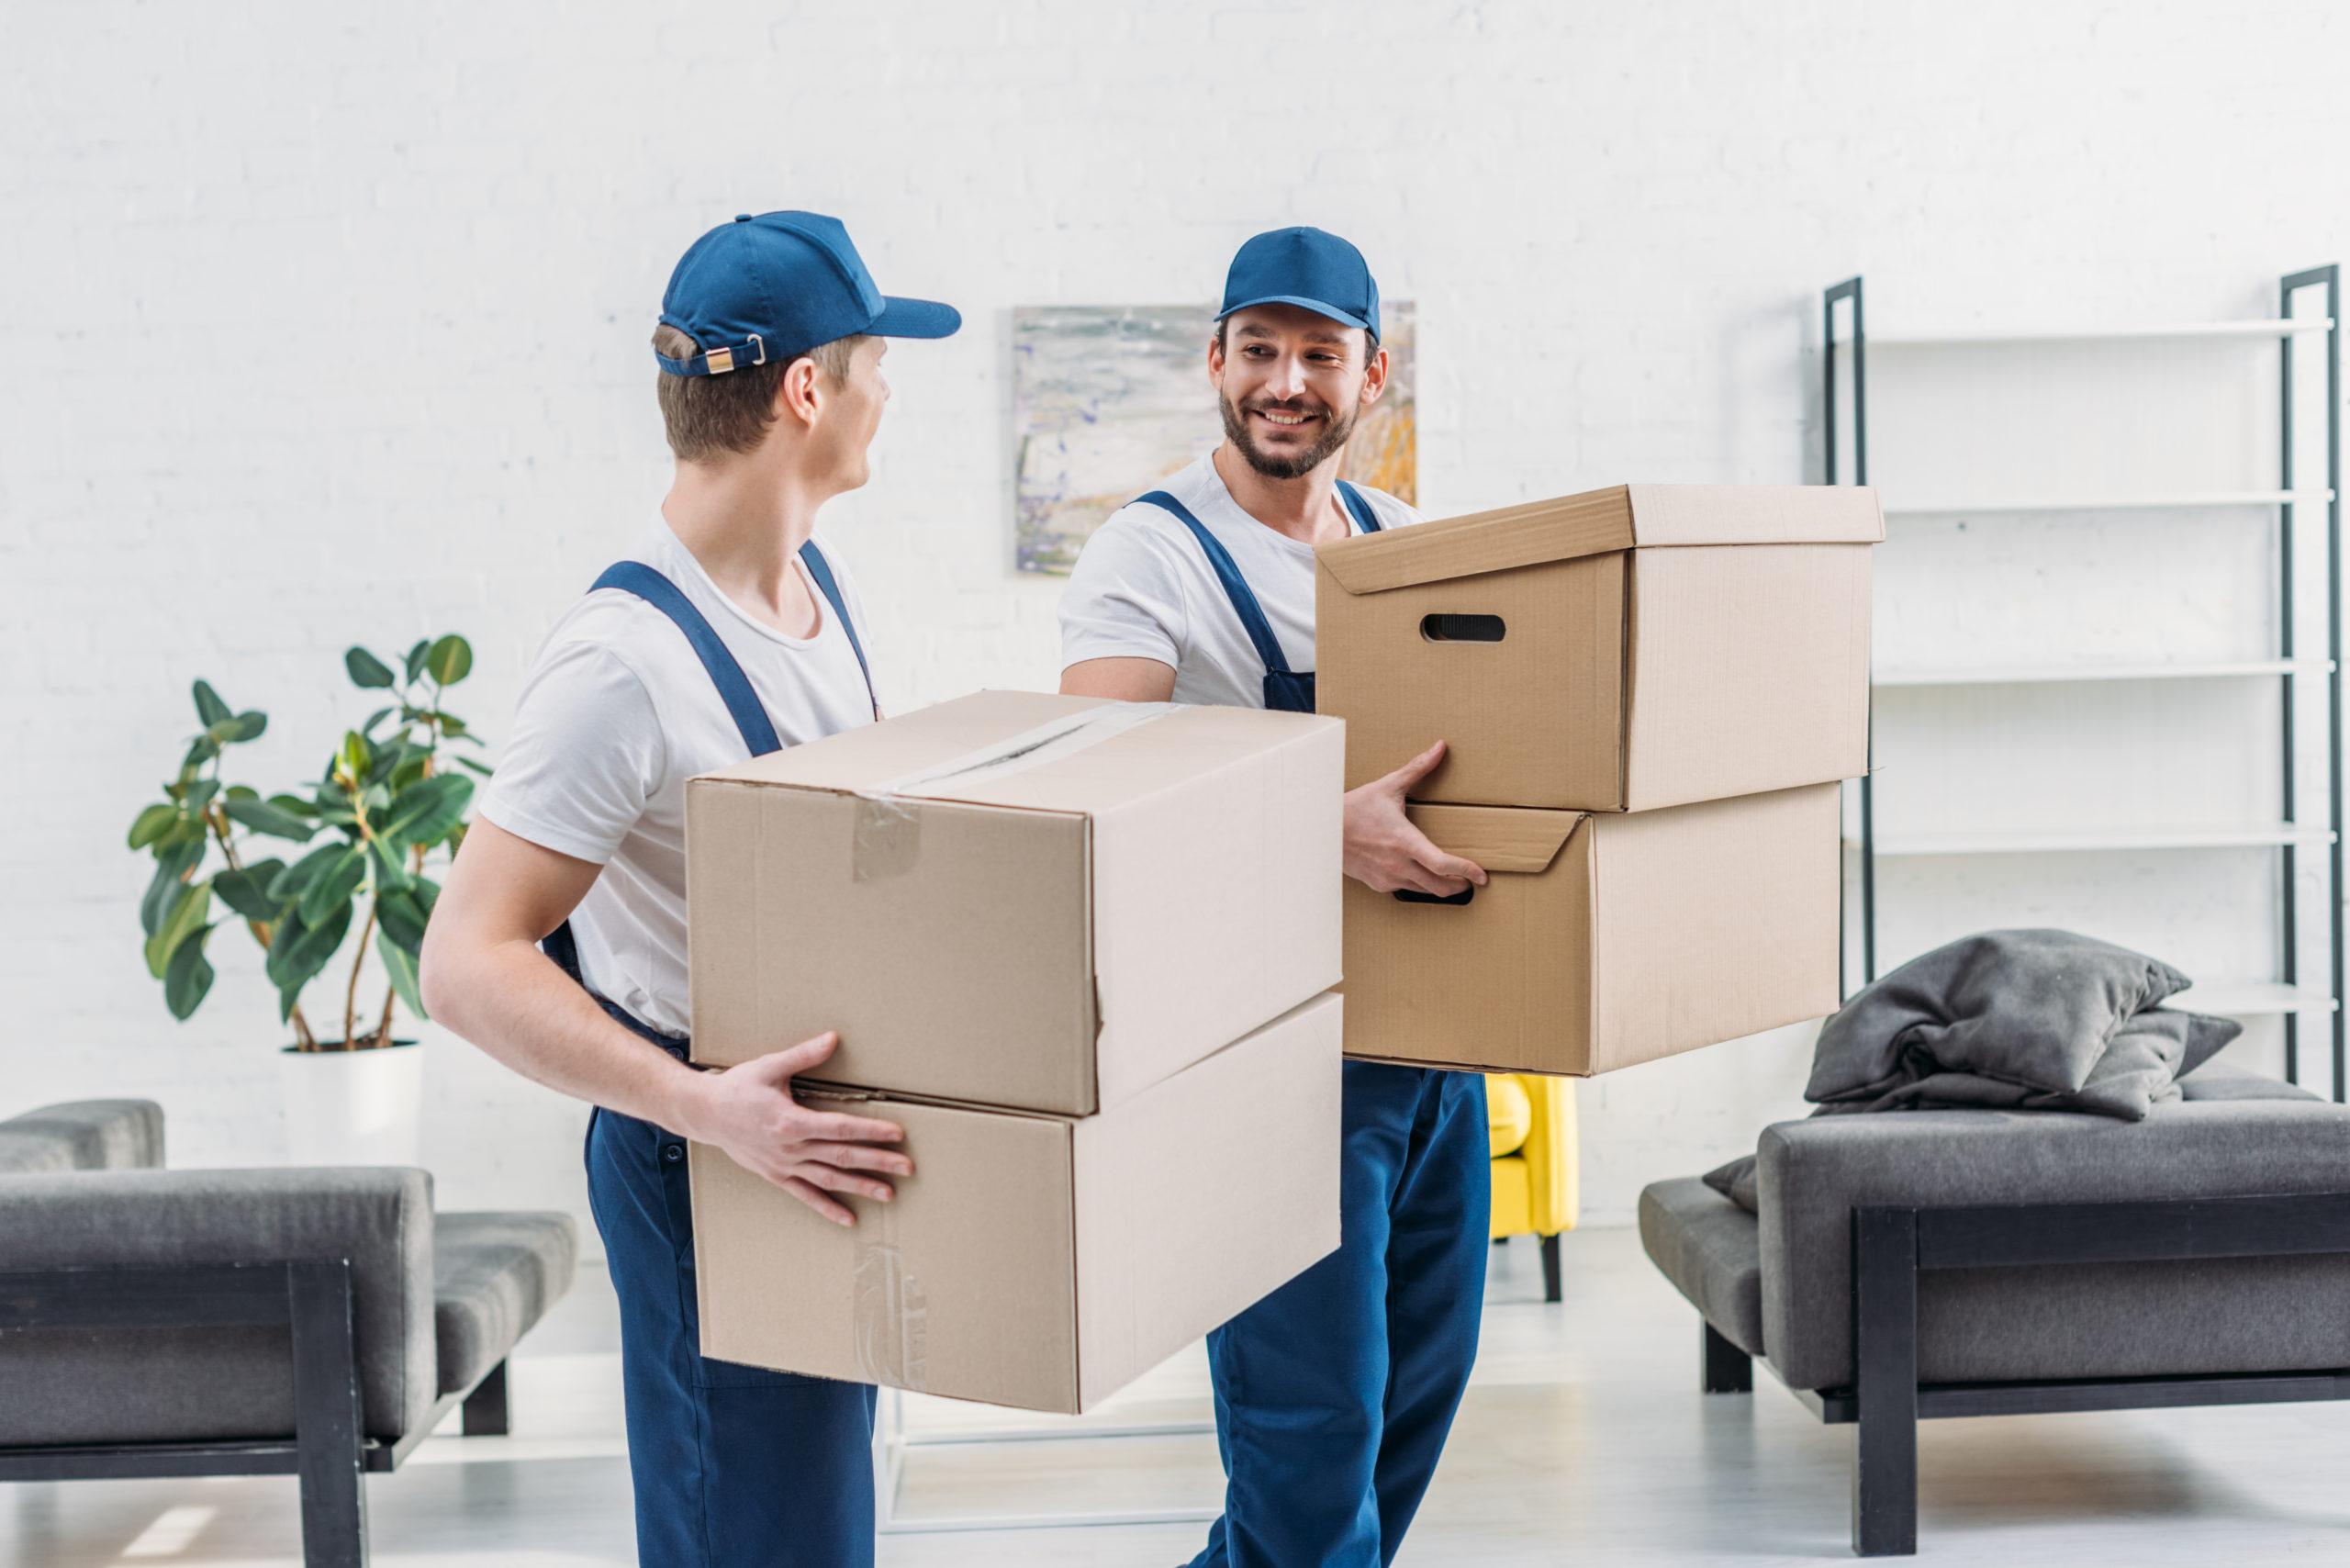 Movers and packers in UAE